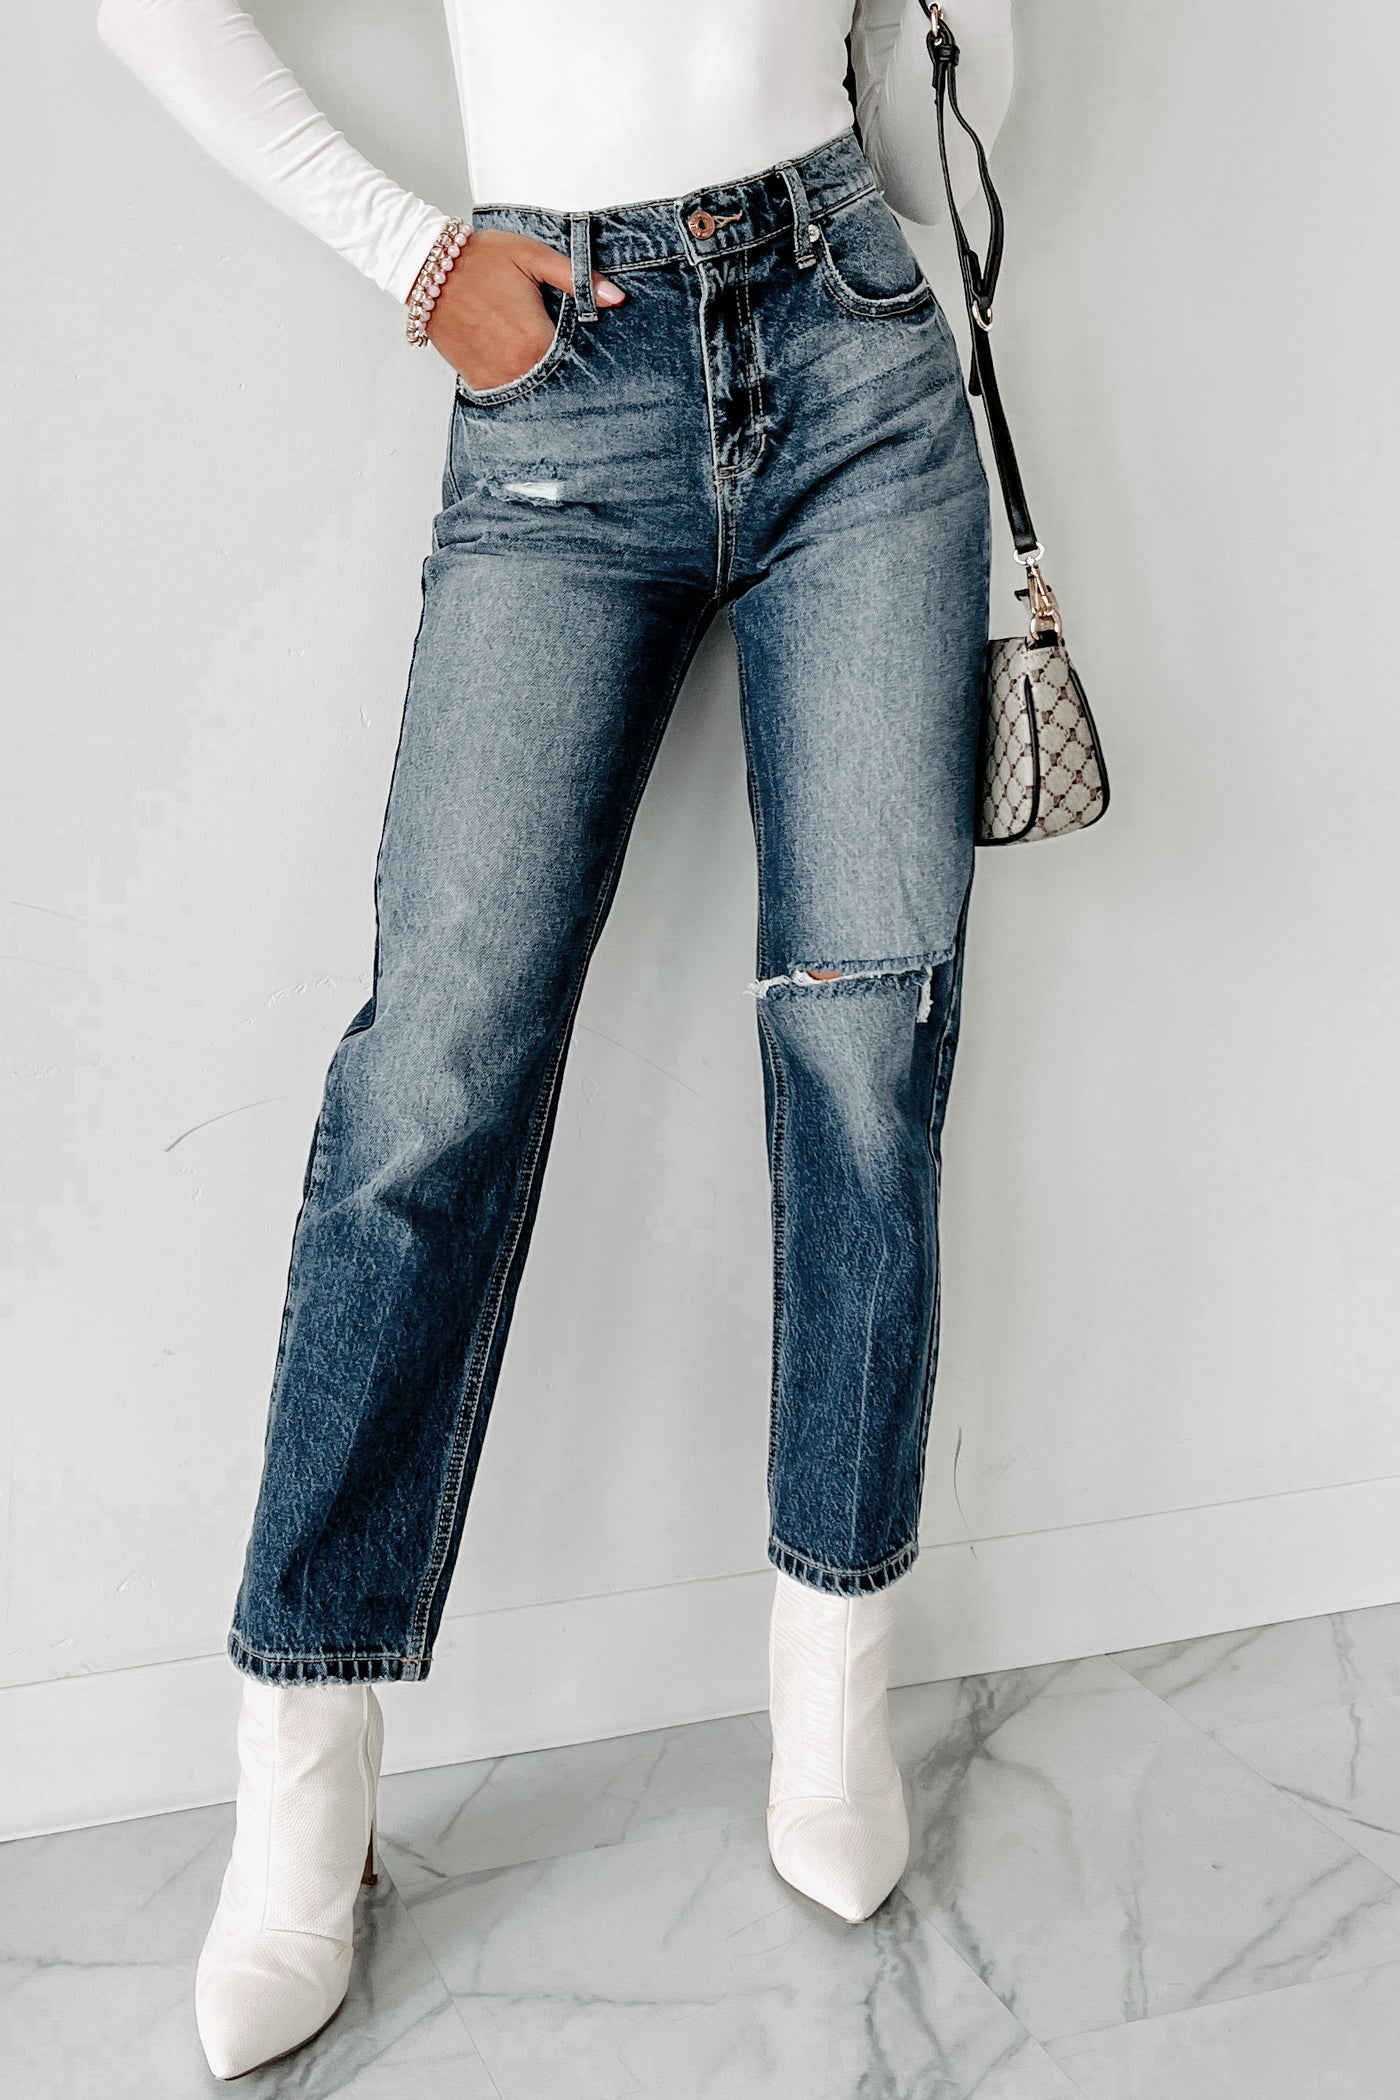 90s Straight Leg Jeans, Women's Straight Jeans Fit Guide